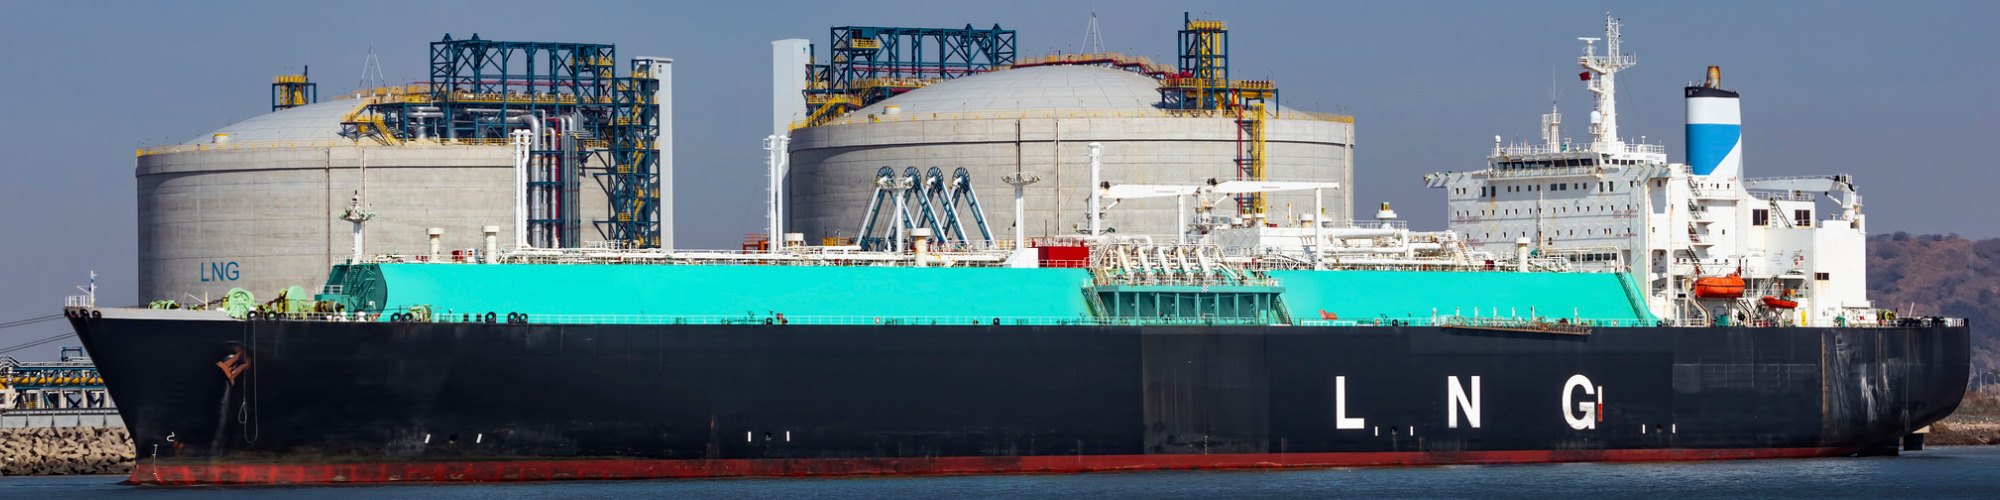 An Introductory Guide to LNG Charters for Maritime Law Professionals